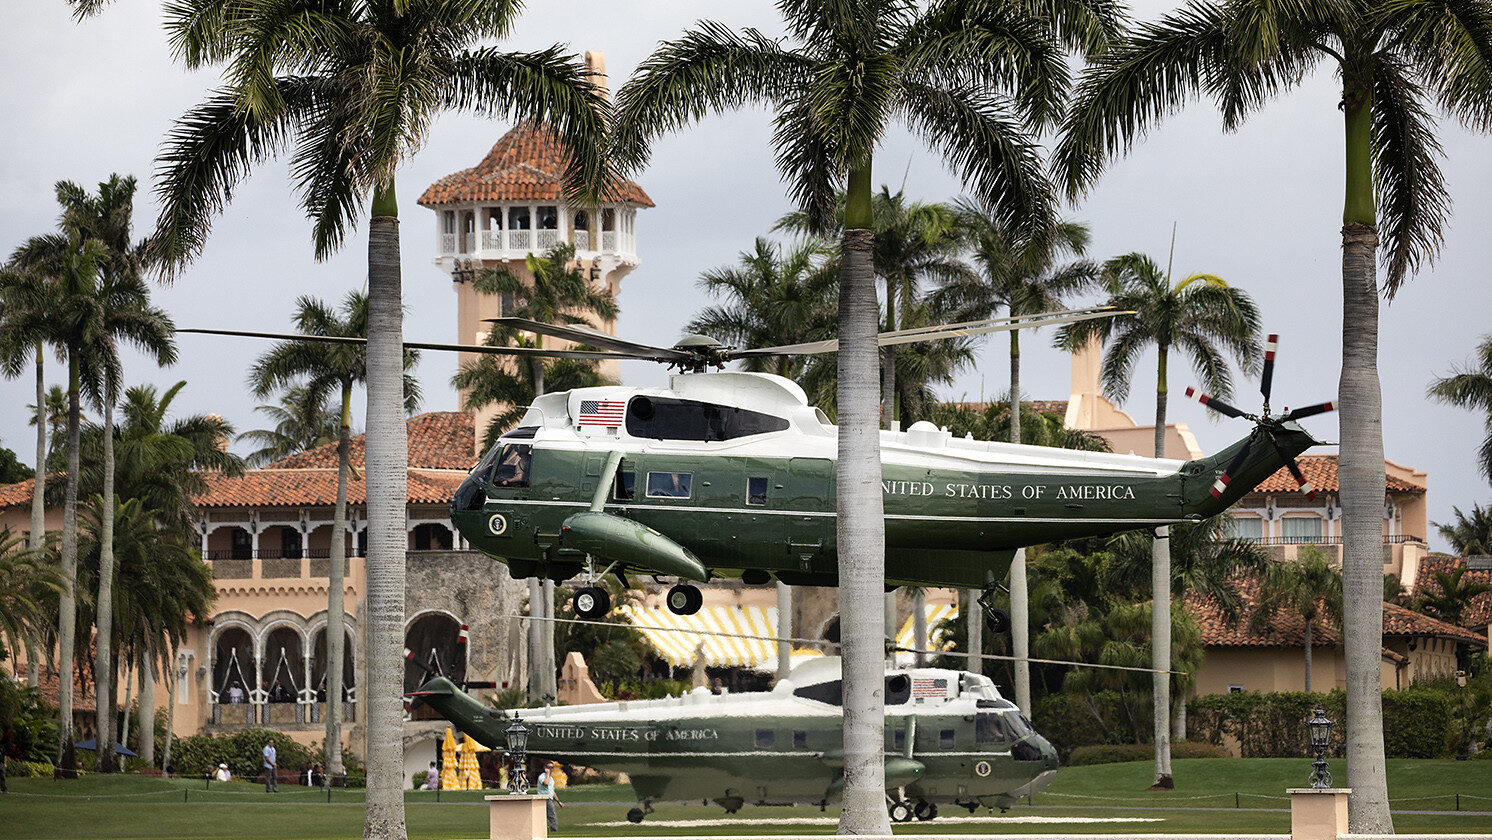 Federal agency delivered numerous documents to Mar-A-Lago prior to DOJ raid